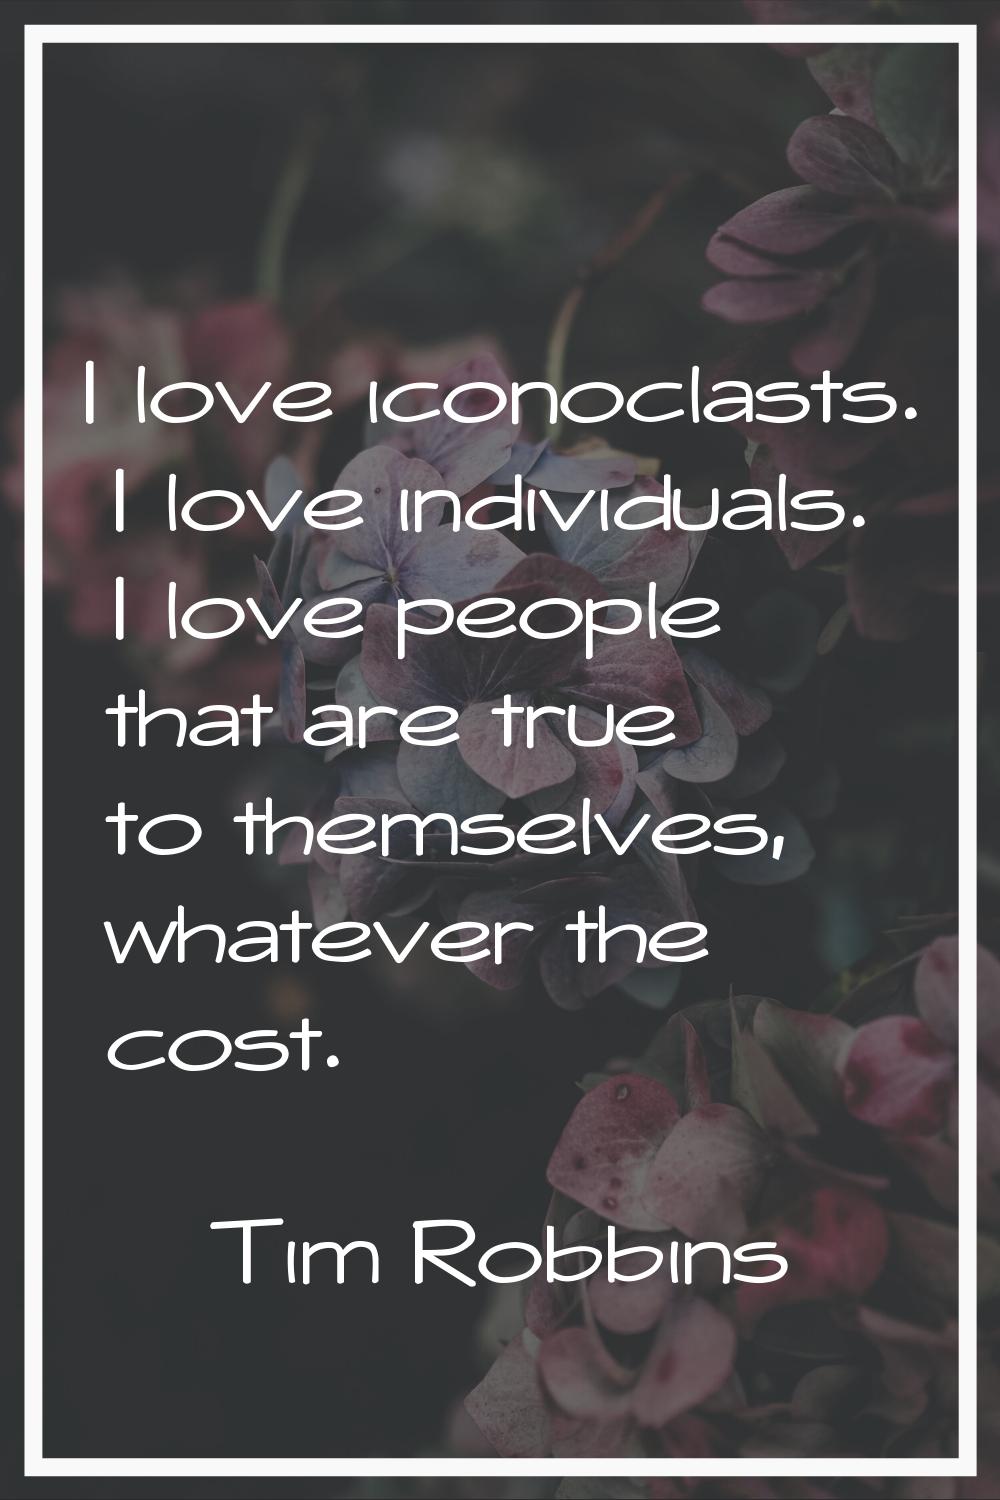 I love iconoclasts. I love individuals. I love people that are true to themselves, whatever the cos